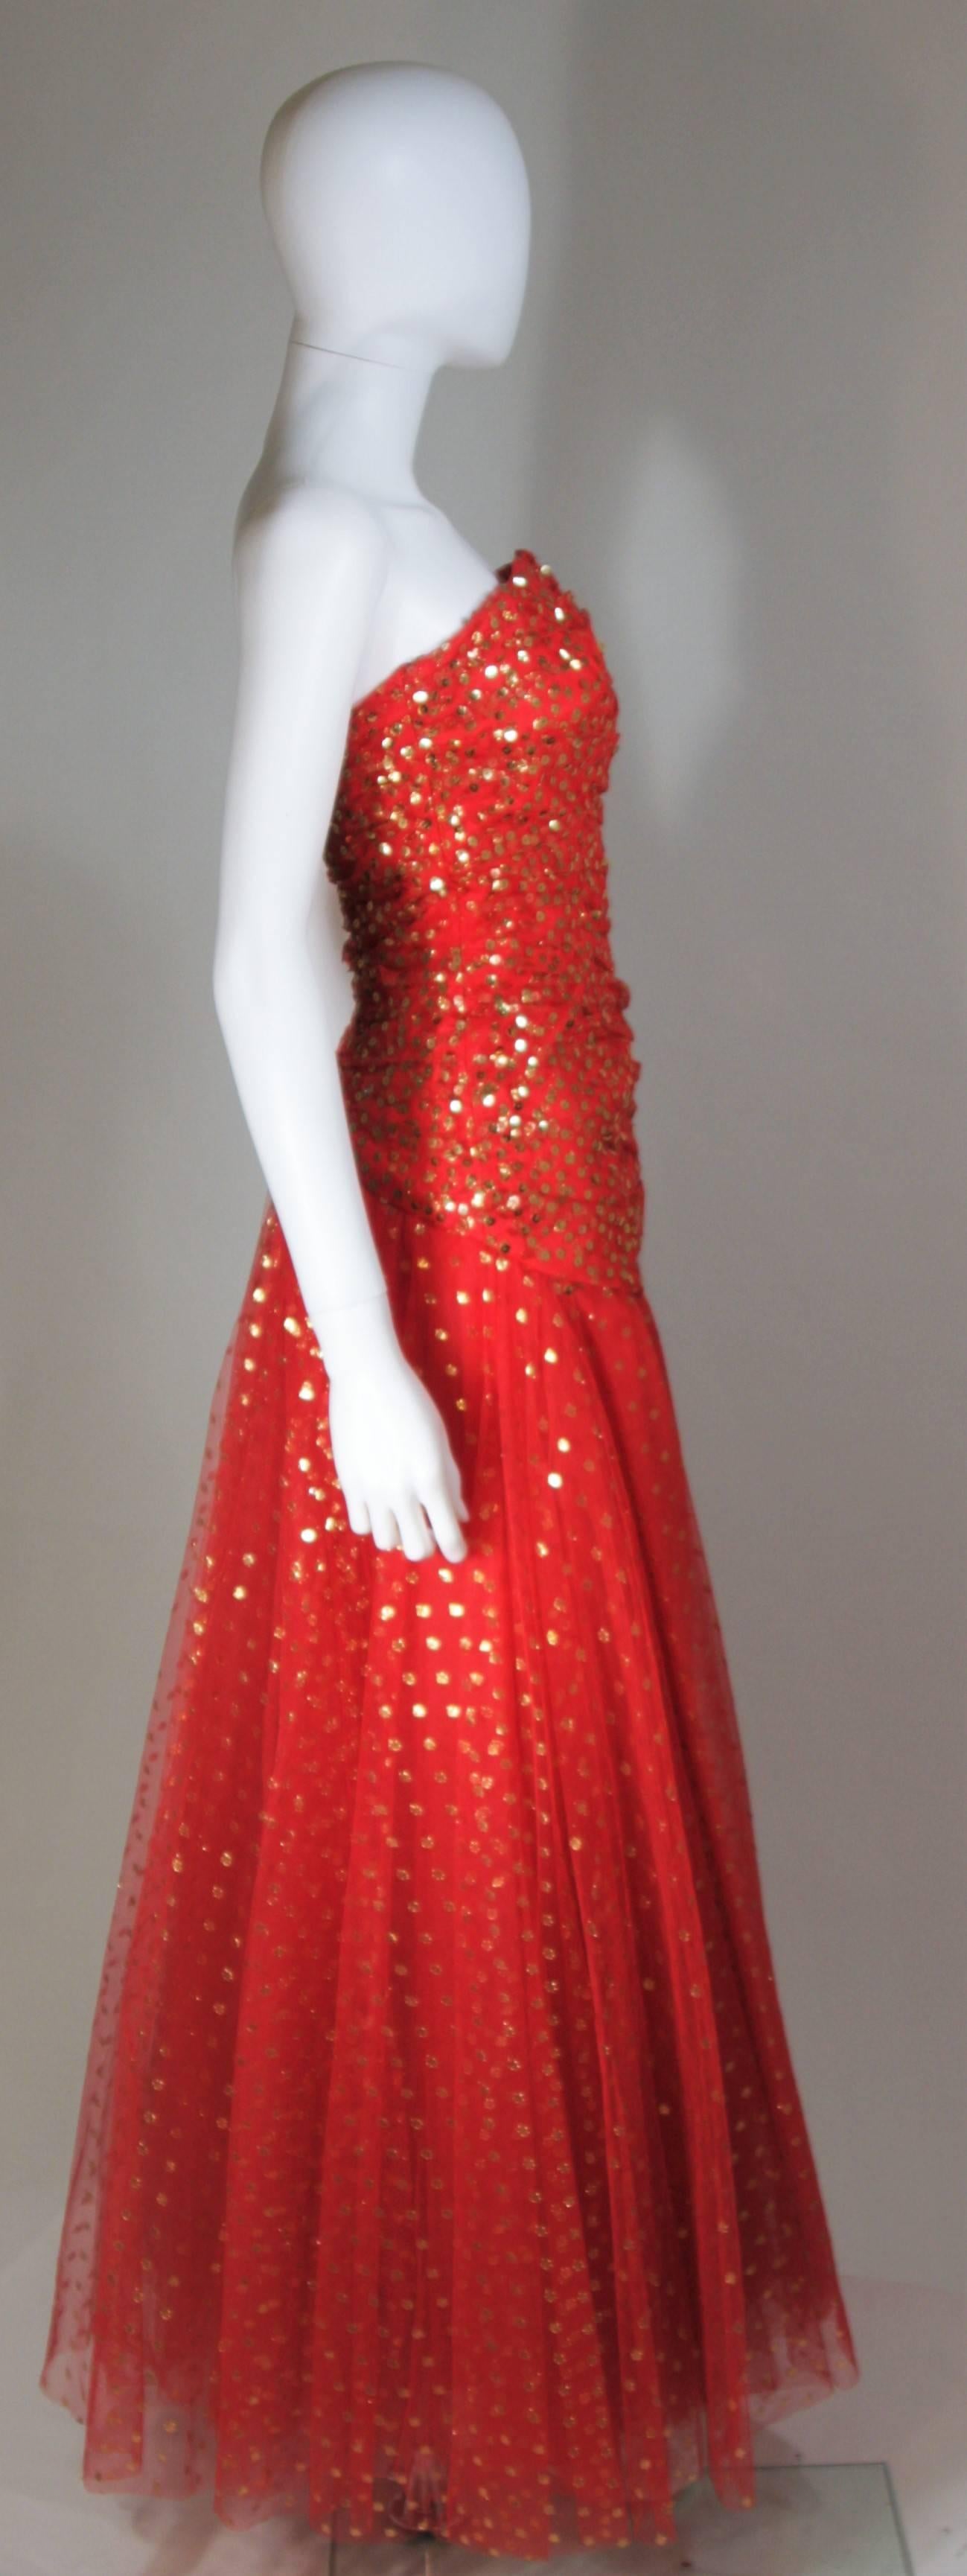 VICTOR COSTA Red Layered Mesh Gown with Gold Sequins Size 8 In Excellent Condition For Sale In Los Angeles, CA